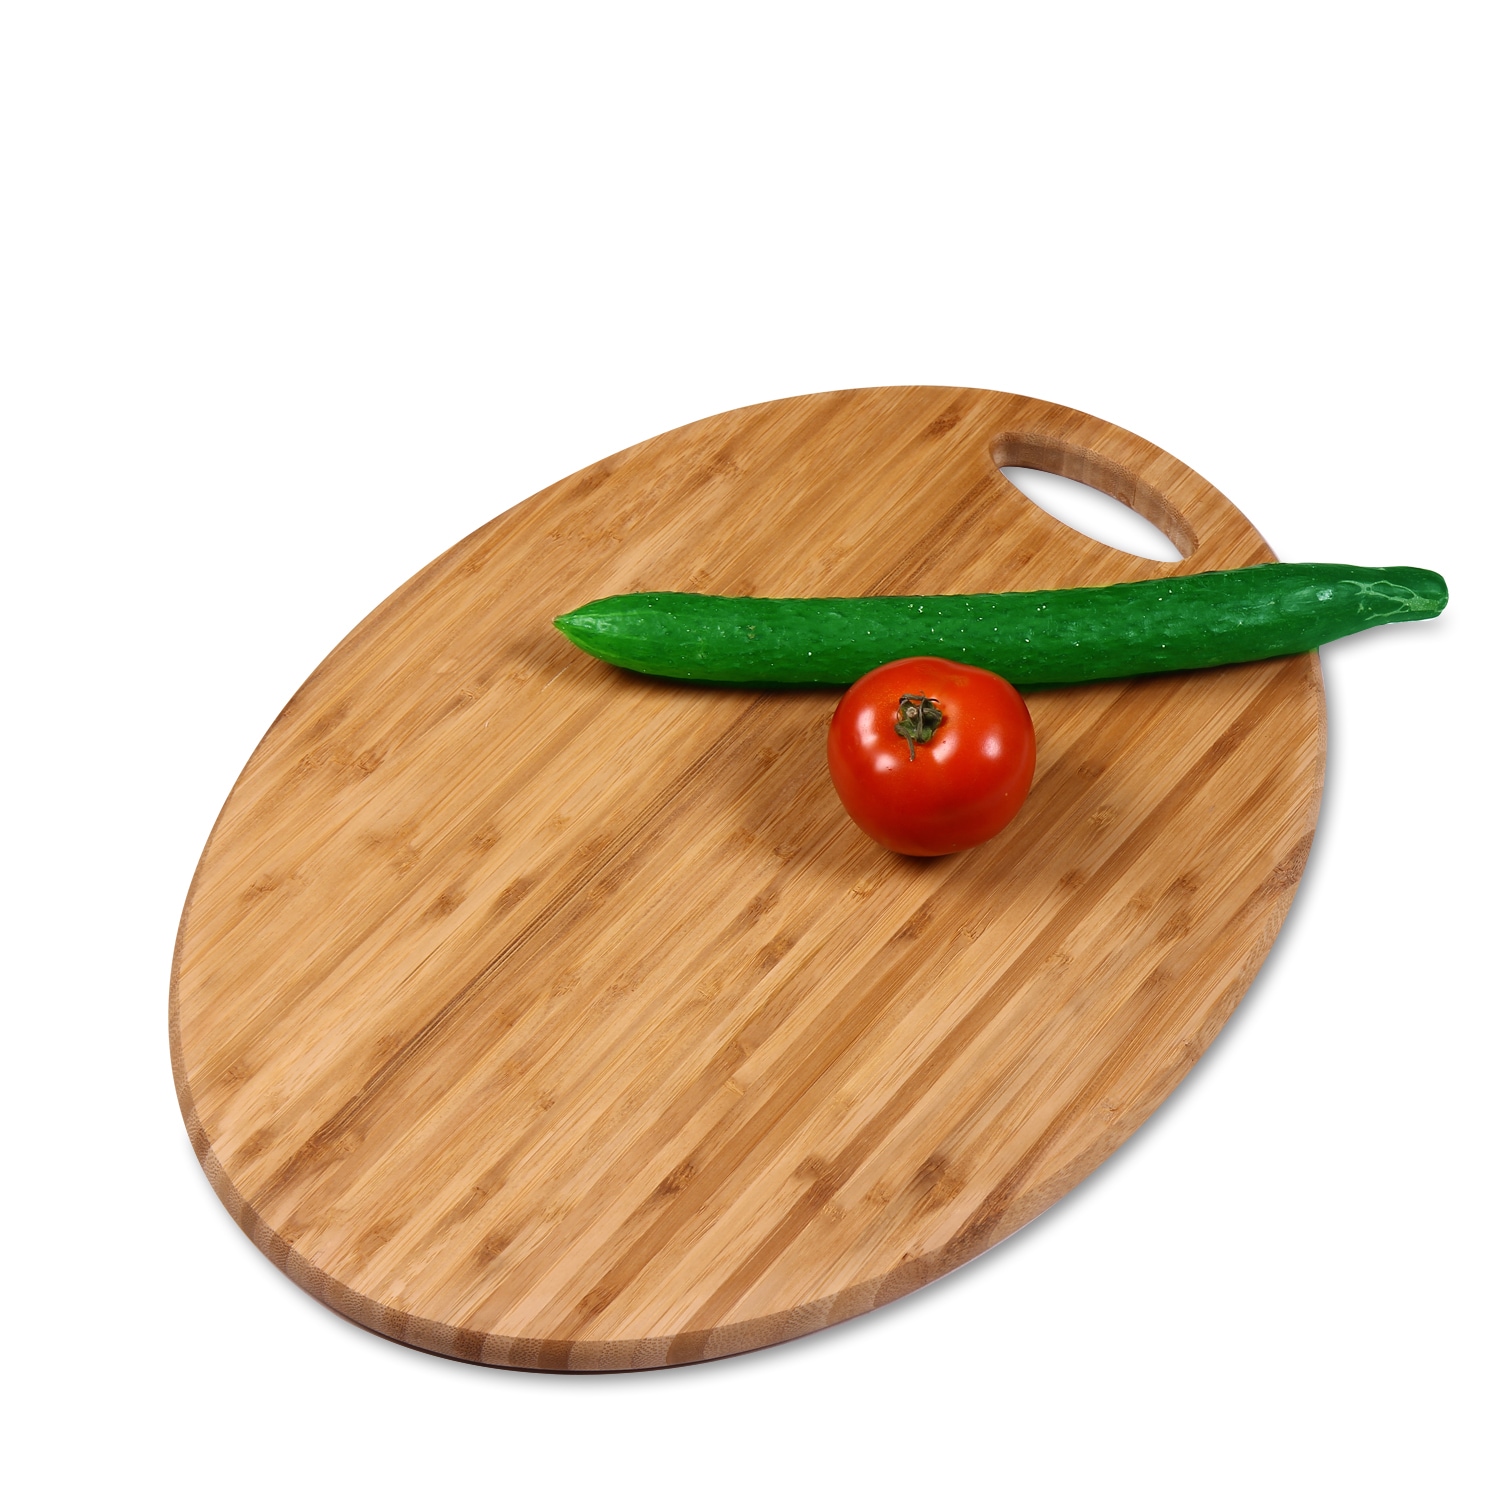 https://ak1.ostkcdn.com/images/products/8900481/Adeco-2-piece-100-percent-Natural-Bamboo-Oval-Chopping-Board-Set-52141623-8a48-4d87-be02-e92fceaa4e60.jpg